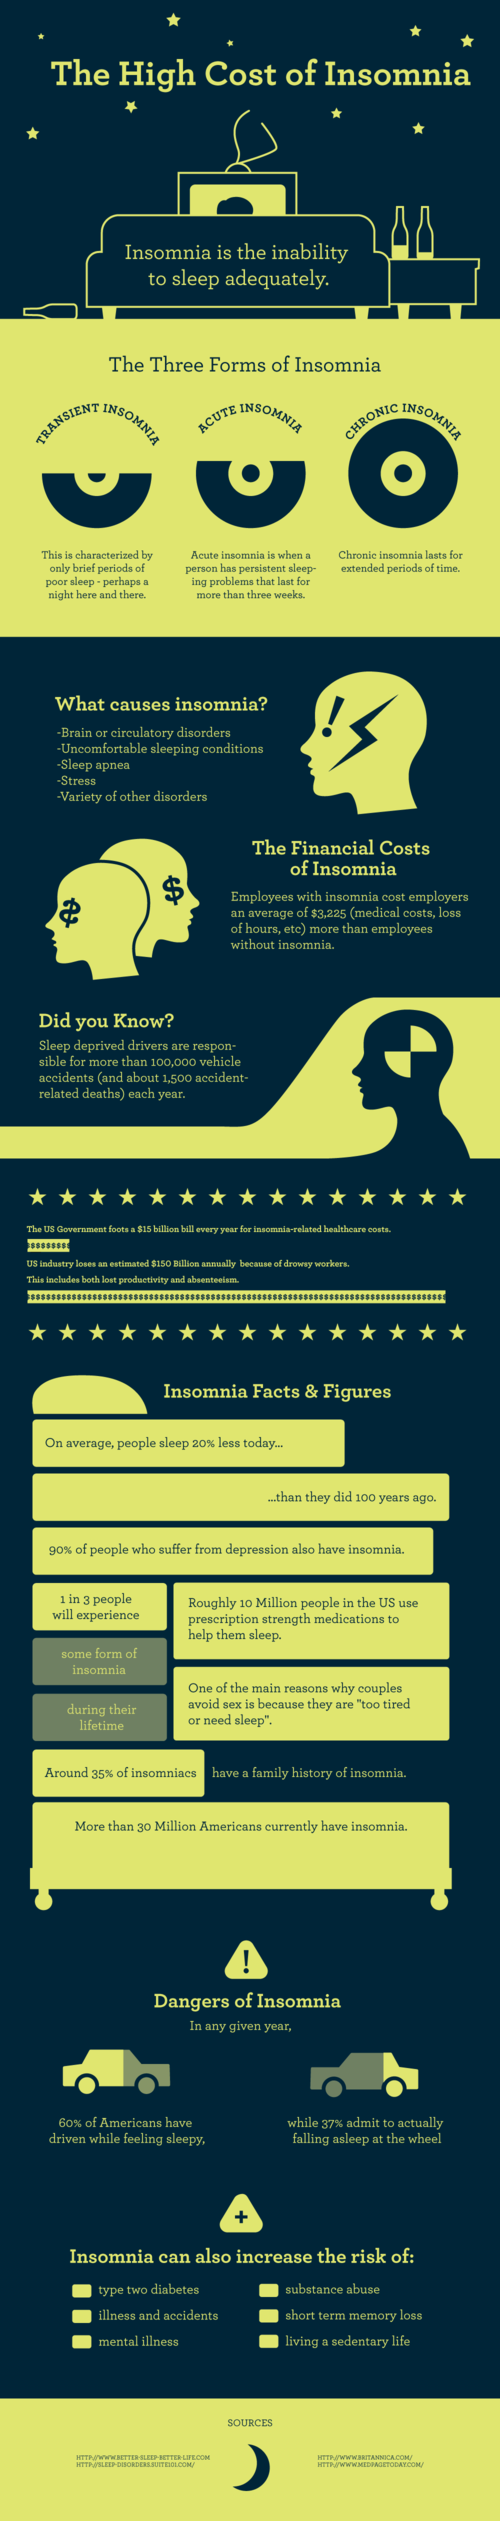 The High Cost of Insomnia